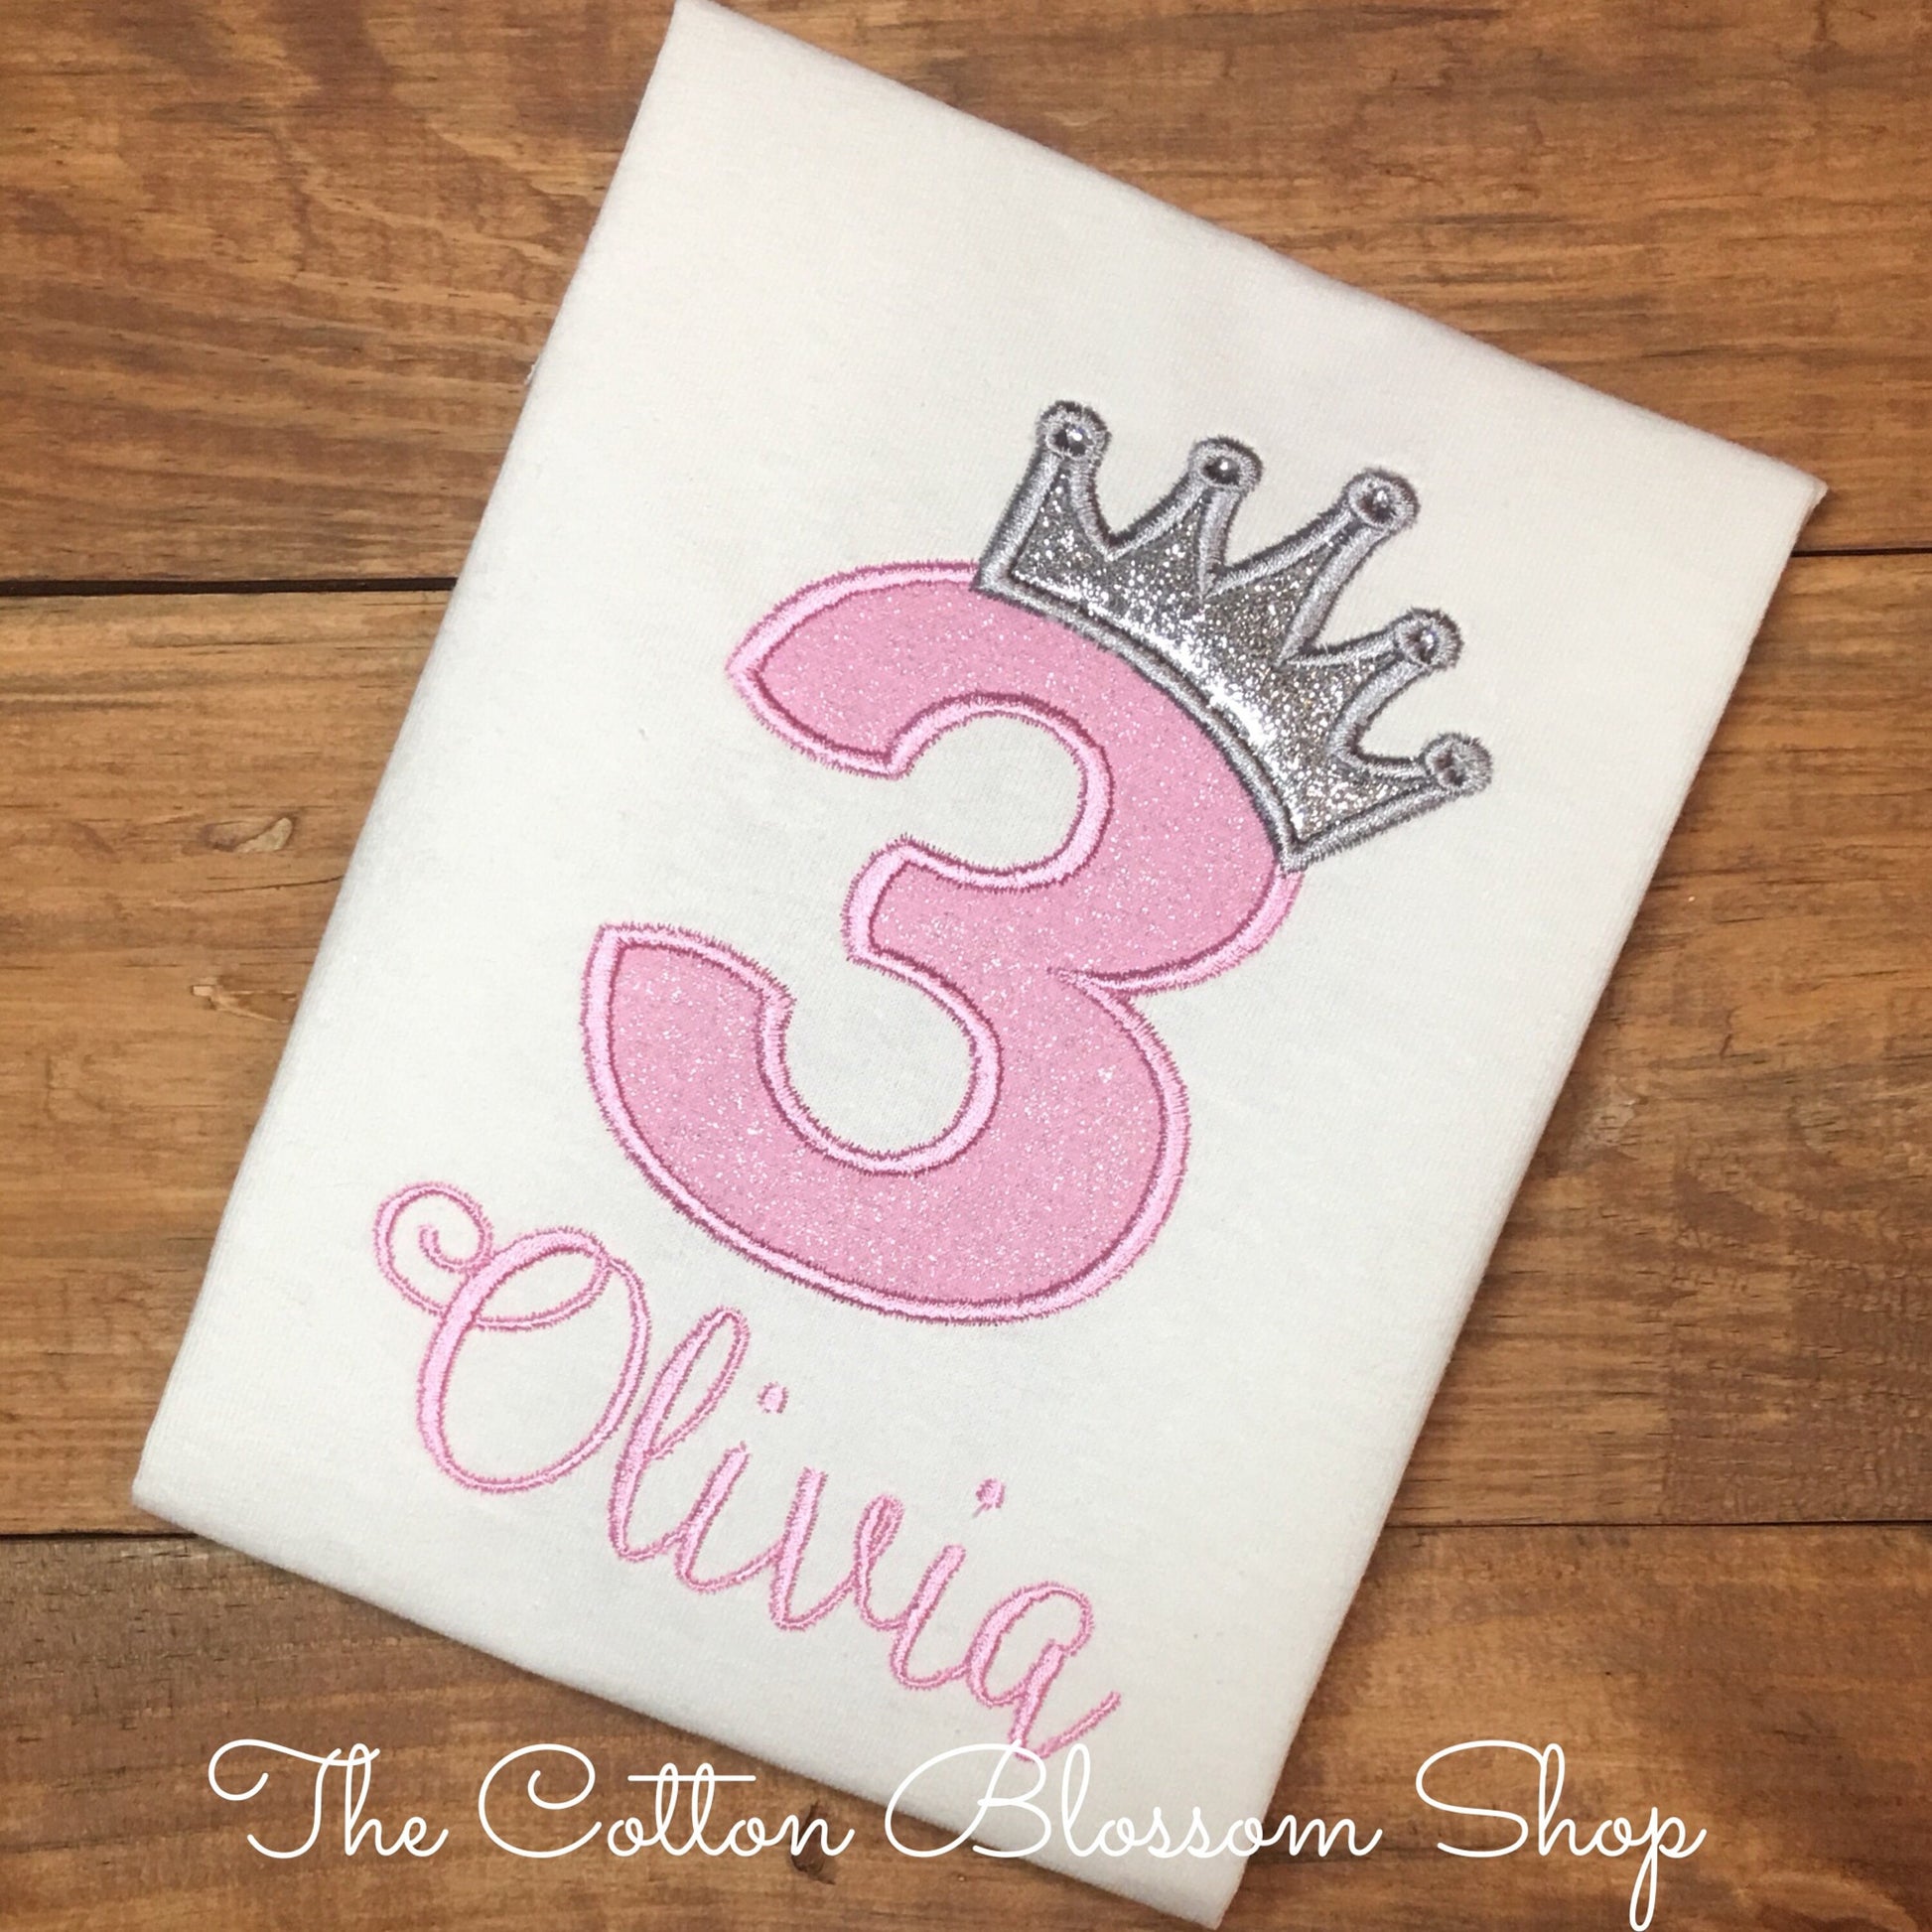 Princess pink and silver birthday shirt with glitter crown, princess shirt, princess glitter crown birthday outfit